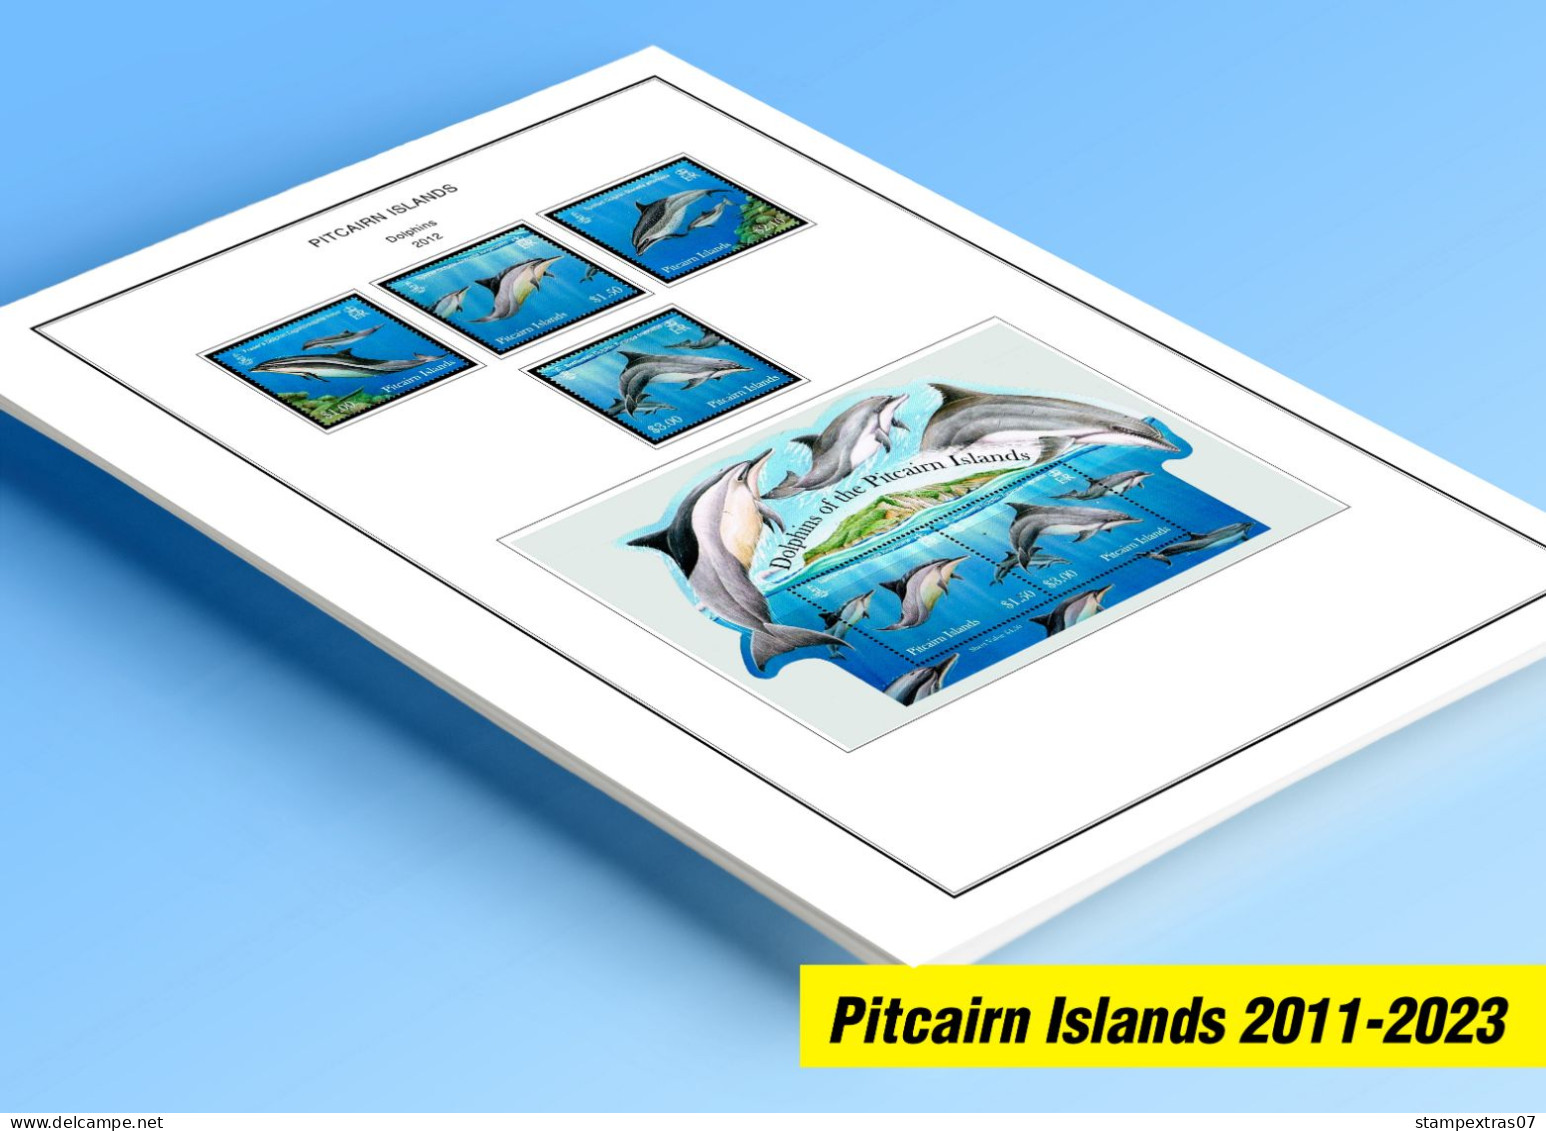 COLOR PRINTED PITCAIRN ISLANDS 2011-2023 STAMP ALBUM PAGES (41 Illustrated Pages) >> FEUILLES ALBUM+++ - Pre-printed Pages